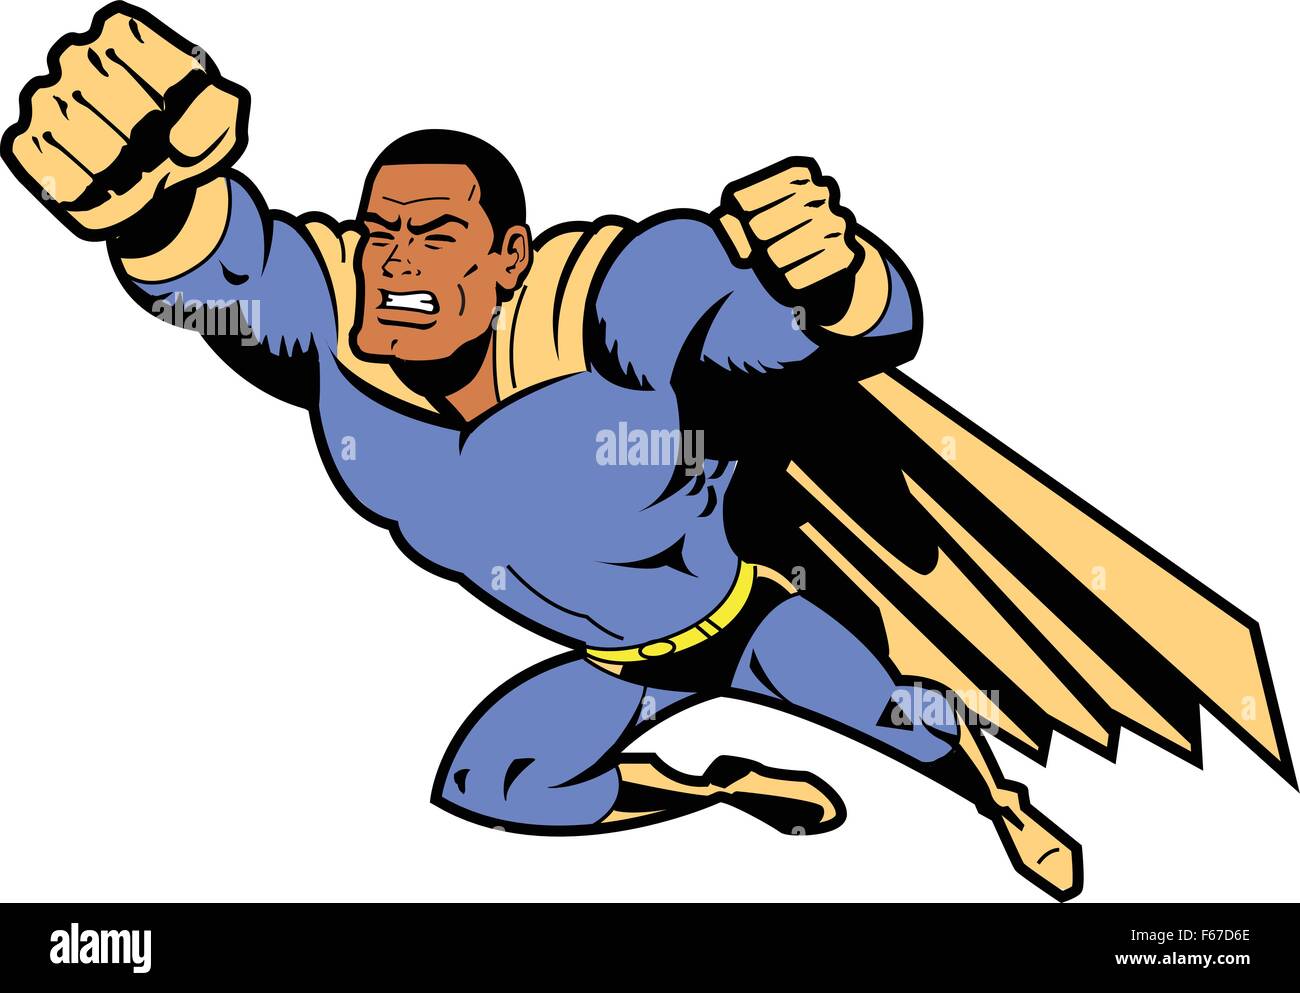 Black Flying Superhero With Clenched Fist Stock Vector